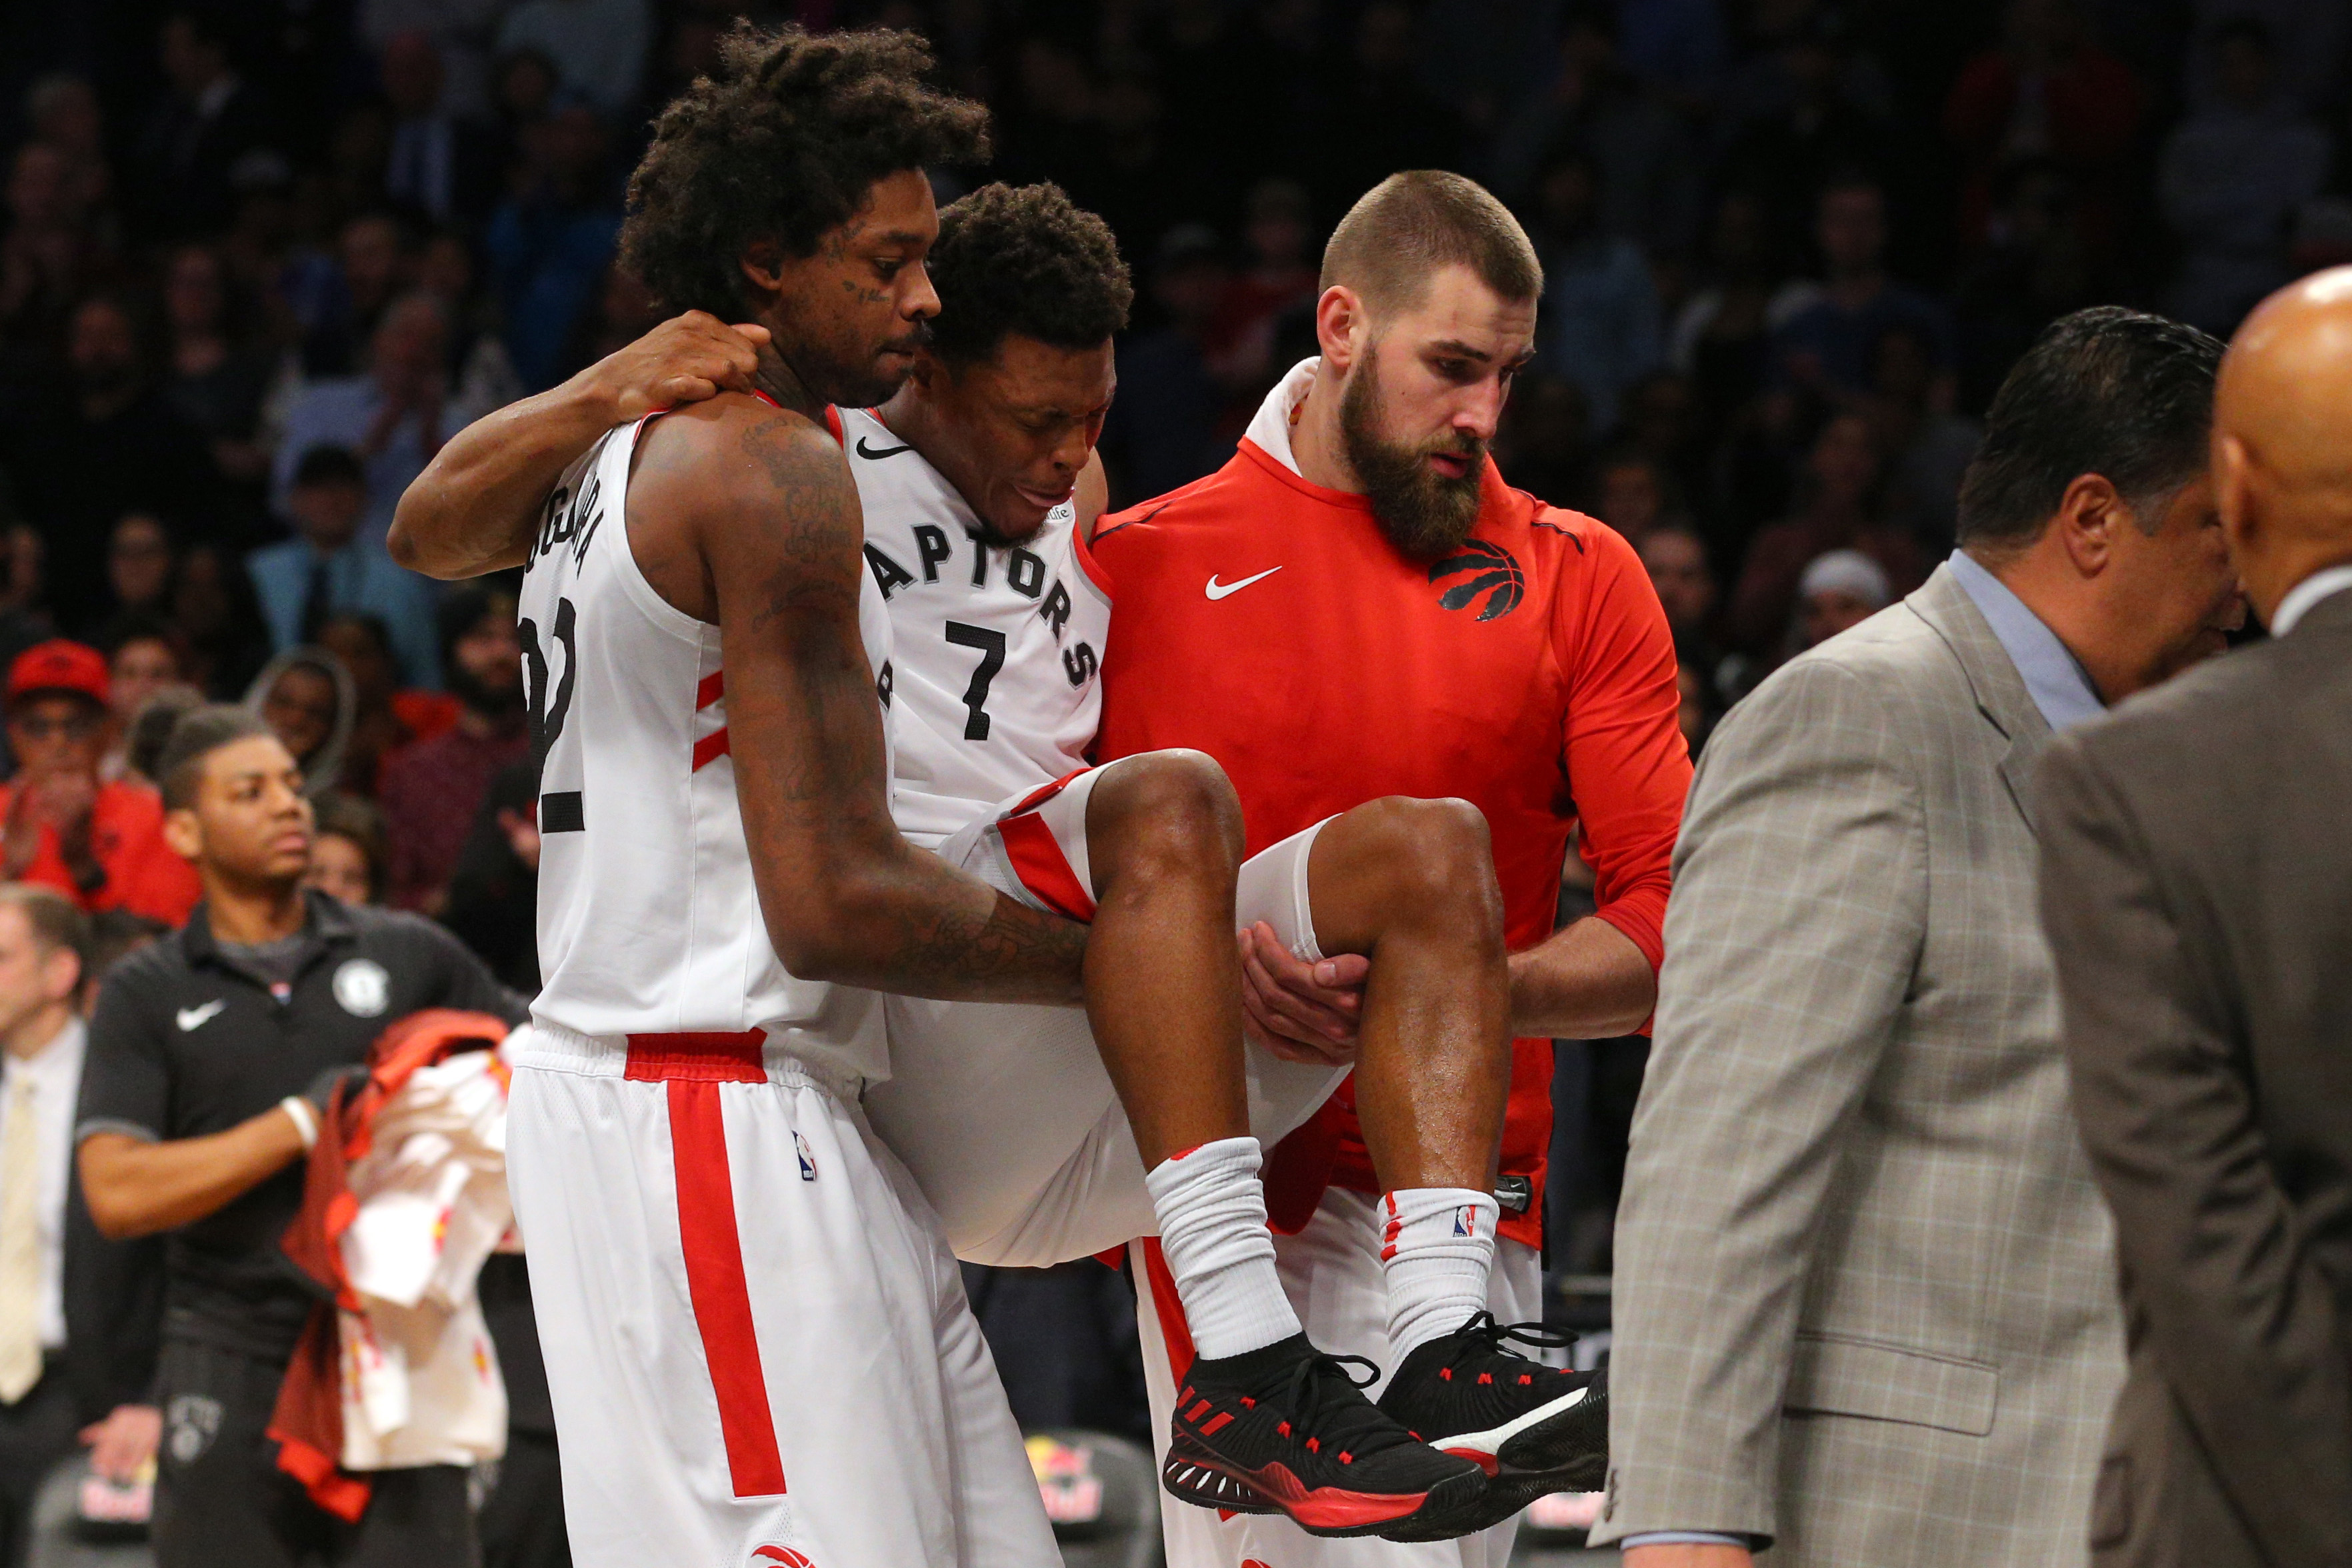 Hoop Central on X: Kyle Lowry tore is ACL in college, skipped